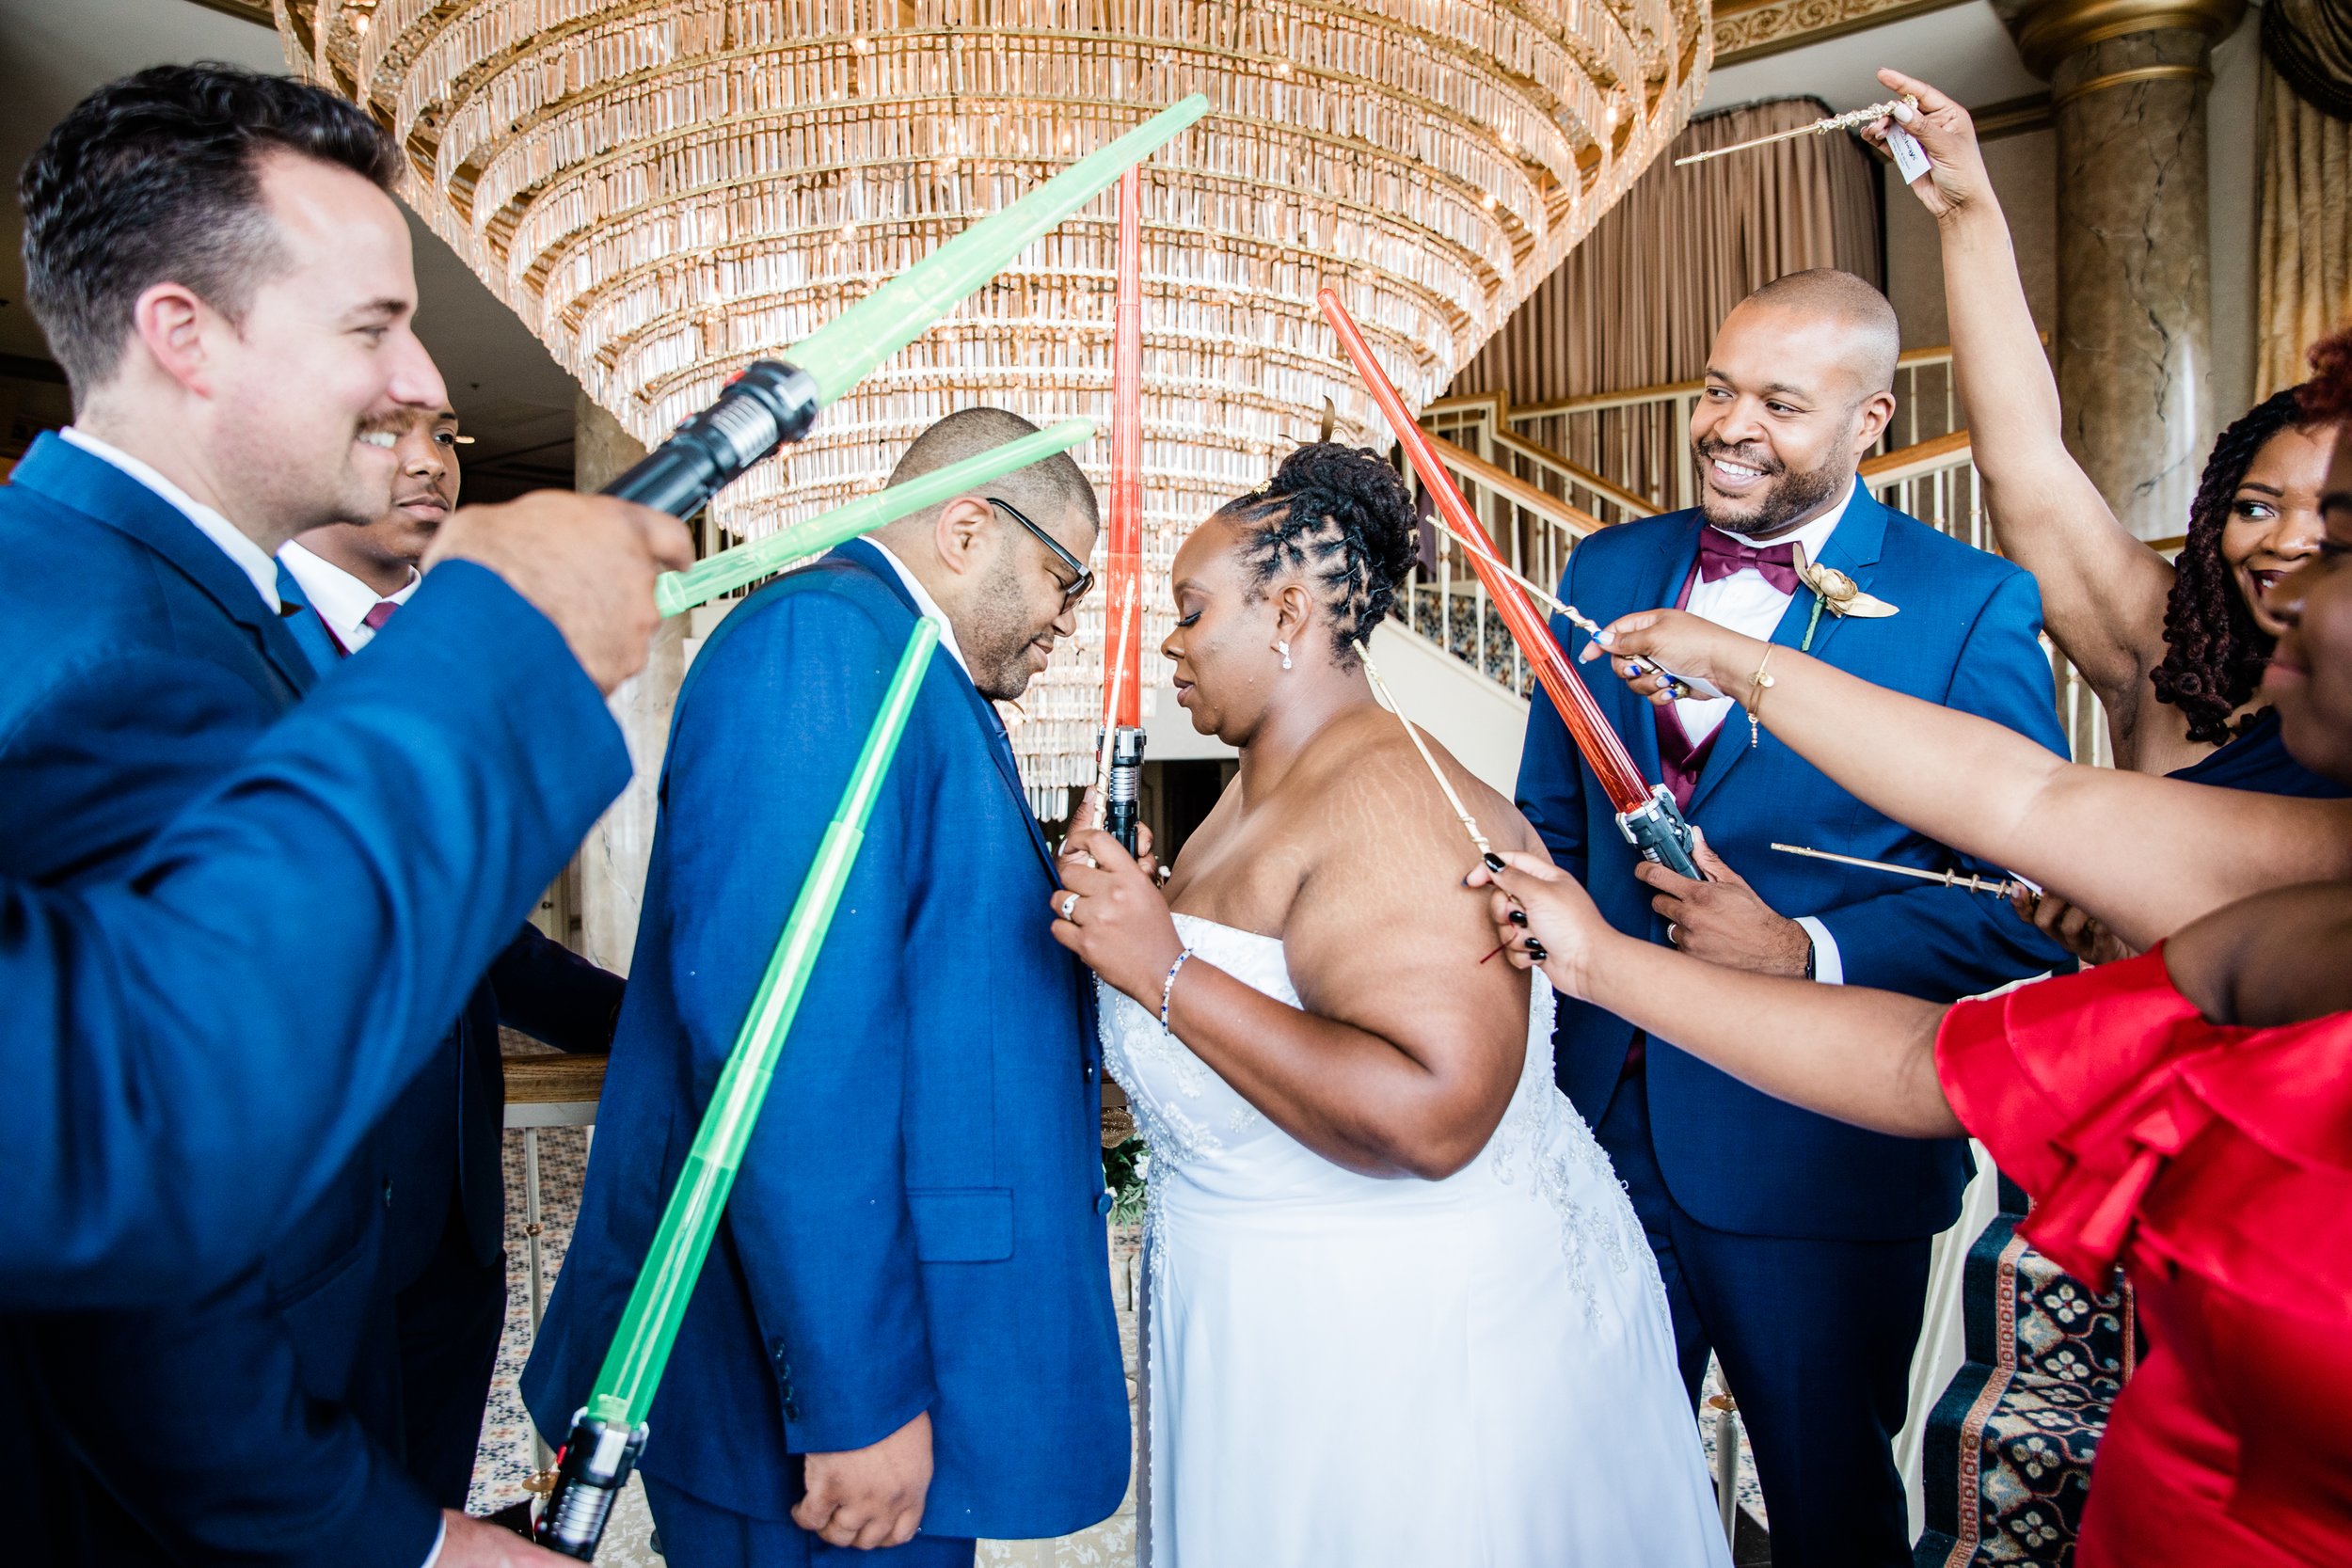 Harry Potter and Star Wars Themed Wedding at Martins West in Baltimore Maryland Shot by Megapixels Media Photography-32.jpg